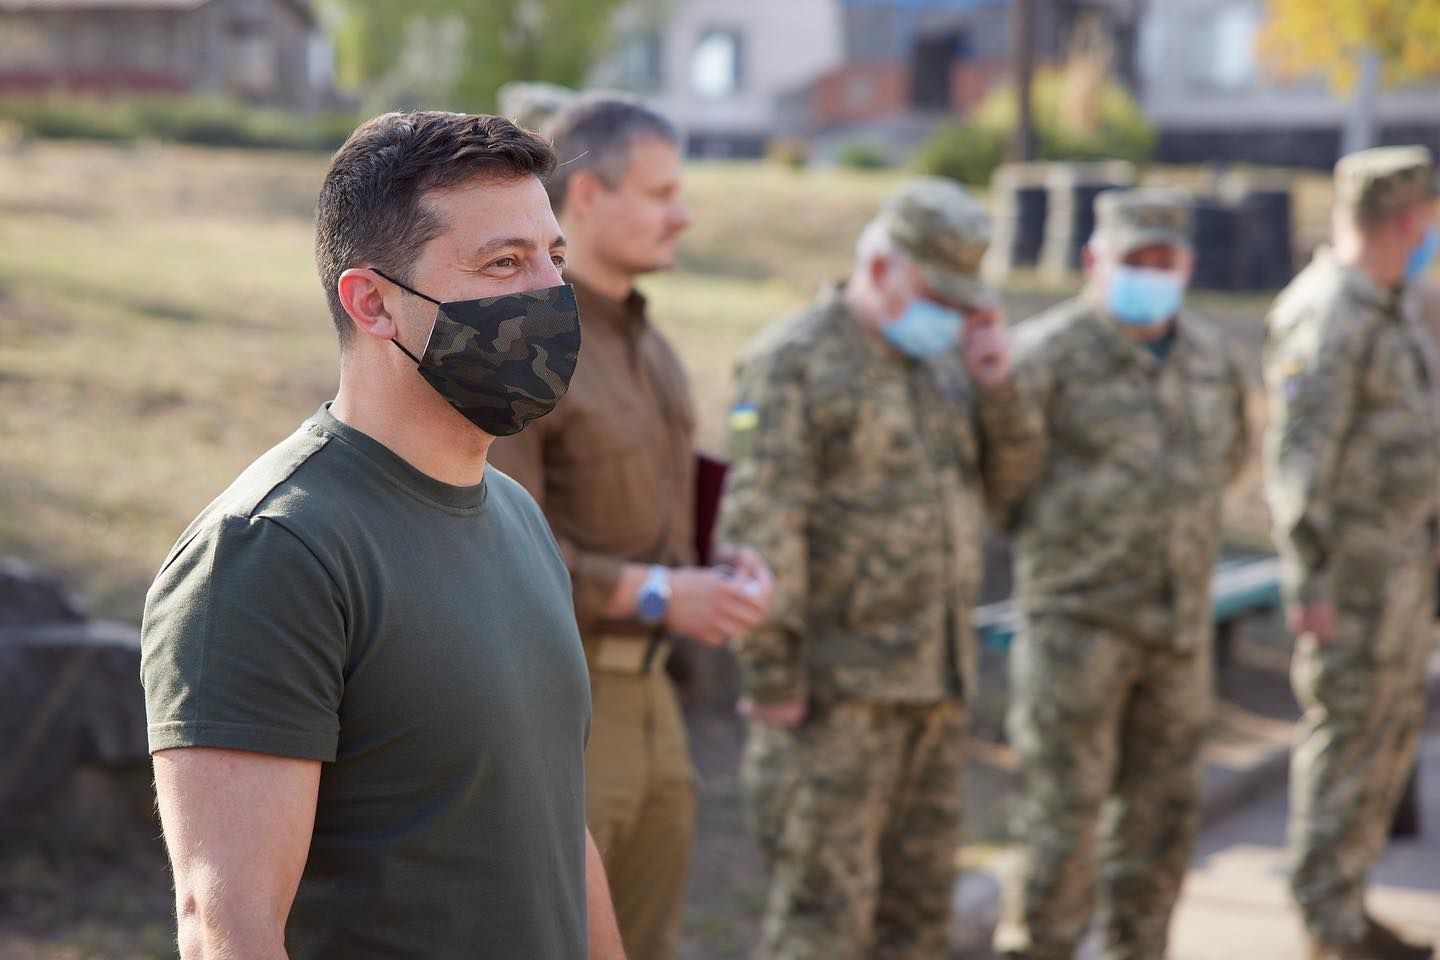 <p>Like other countries, Ukraine struggled under the strain of the <a href="https://huri.harvard.edu/covid-19-ukraine-assessing-governments-response">pandemic</a>. As elsewhere, not everyone supported these mitigation efforts, leading to internal tensions, especially among municipal politicians. Zelensky and his party <a href="https://www.britannica.com/biography/Volodymyr-Zelensky#:~:text=The%20poor%20electoral%20performance%20also%20reflected%20an%20overall%20decline%20in%20Zelensky%E2%80%99s%20public%20approval.">saw their popularity waver</a>.</p><p><a href="https://www.instagram.com/p/CGVZahLl0GR/">See photo on Instagram</a></p>